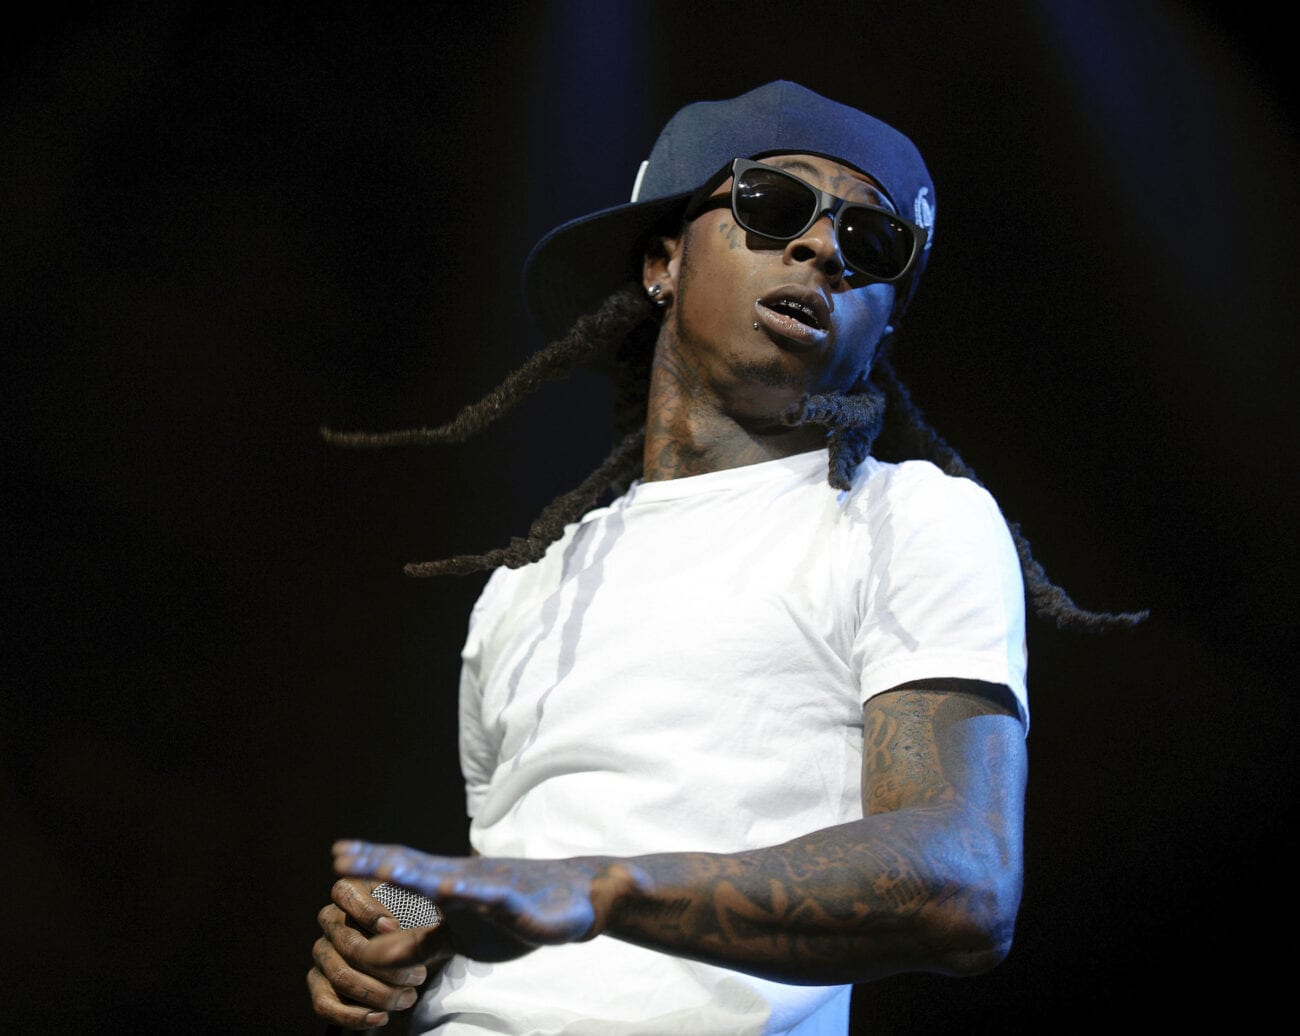 Hip-hop superstar Dwayne Carter, AKA Lil’ Wayne, AKA Tunechi is no stranger to indictment. How has his latest crime impacted his net worth?